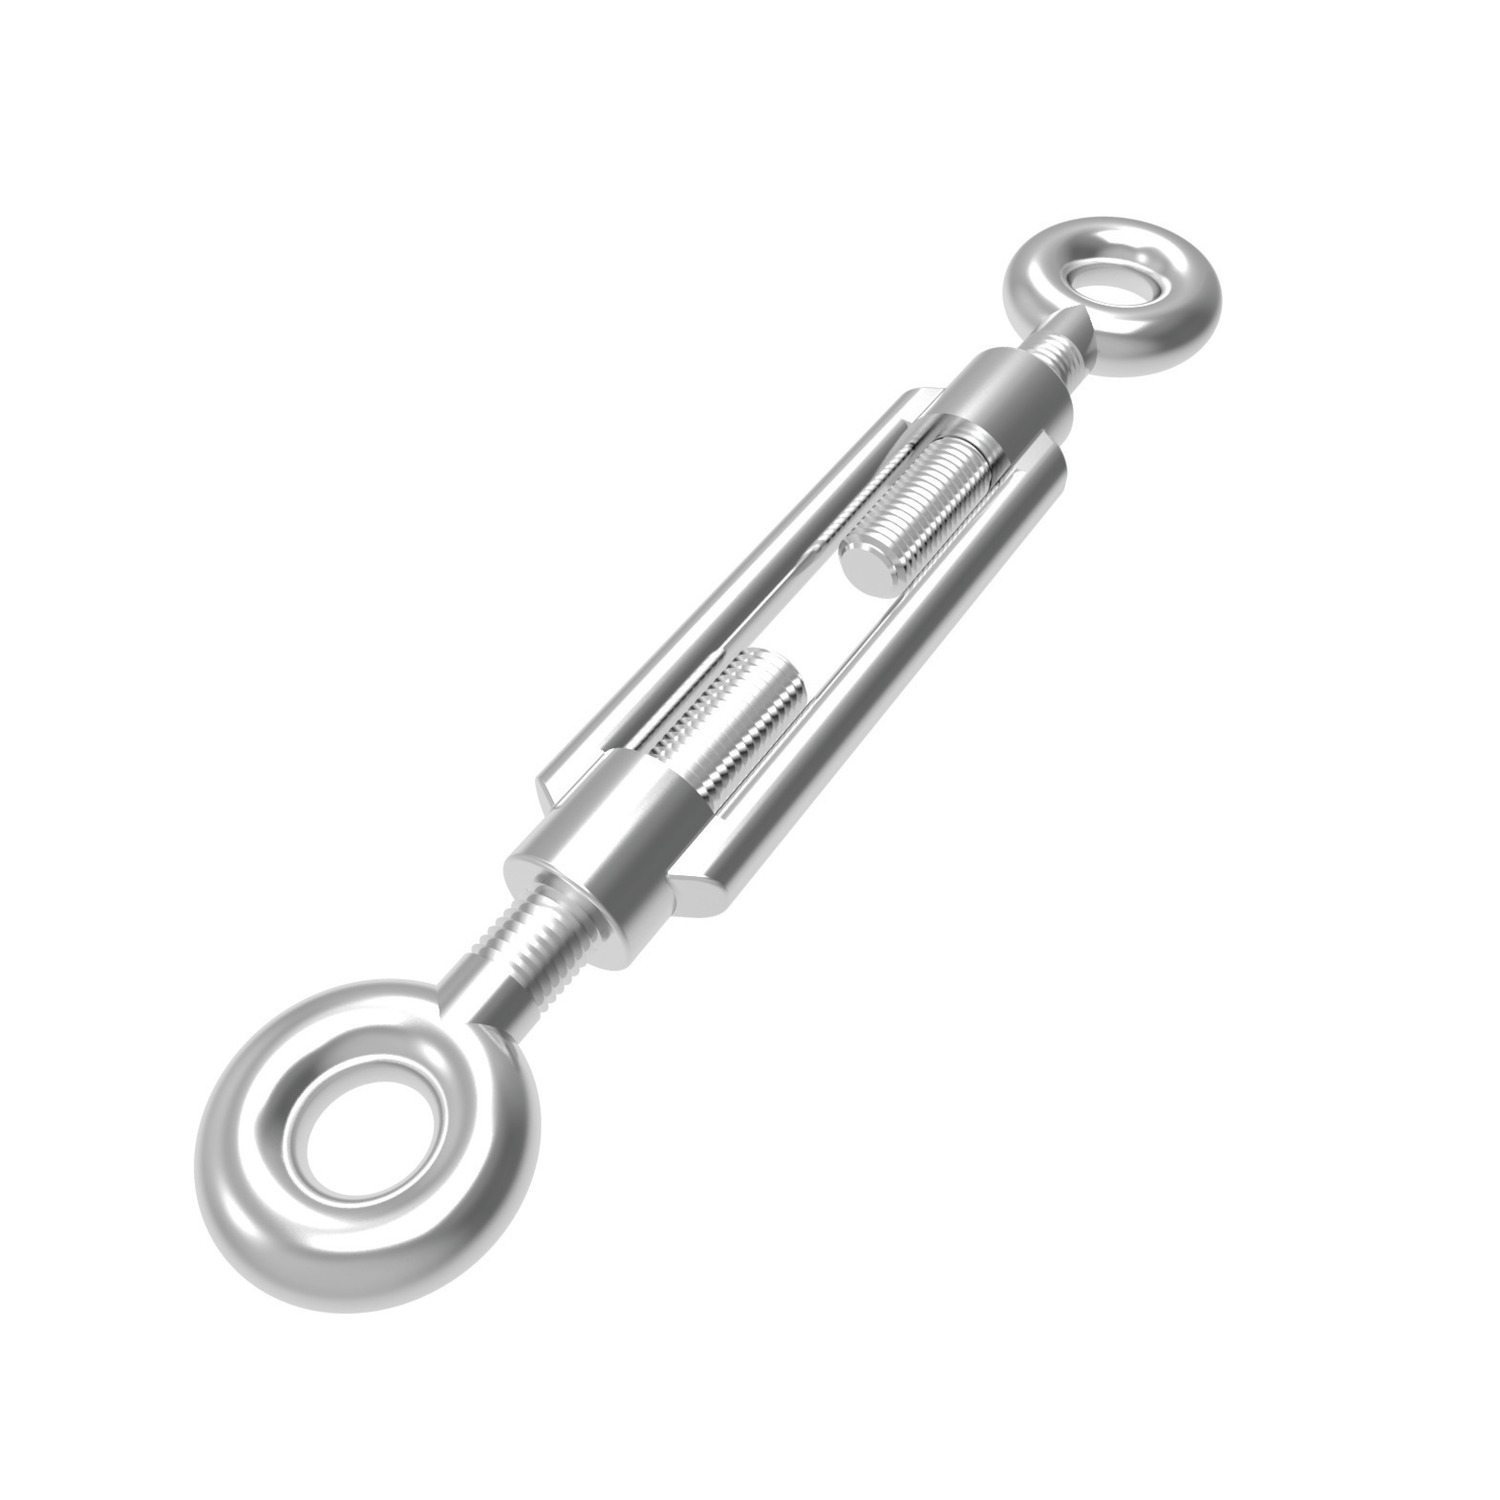 R3842.006-A4 Eye End Turnbuckles  M6 A4 s/s Not to be used for lifting unless SWL marked.